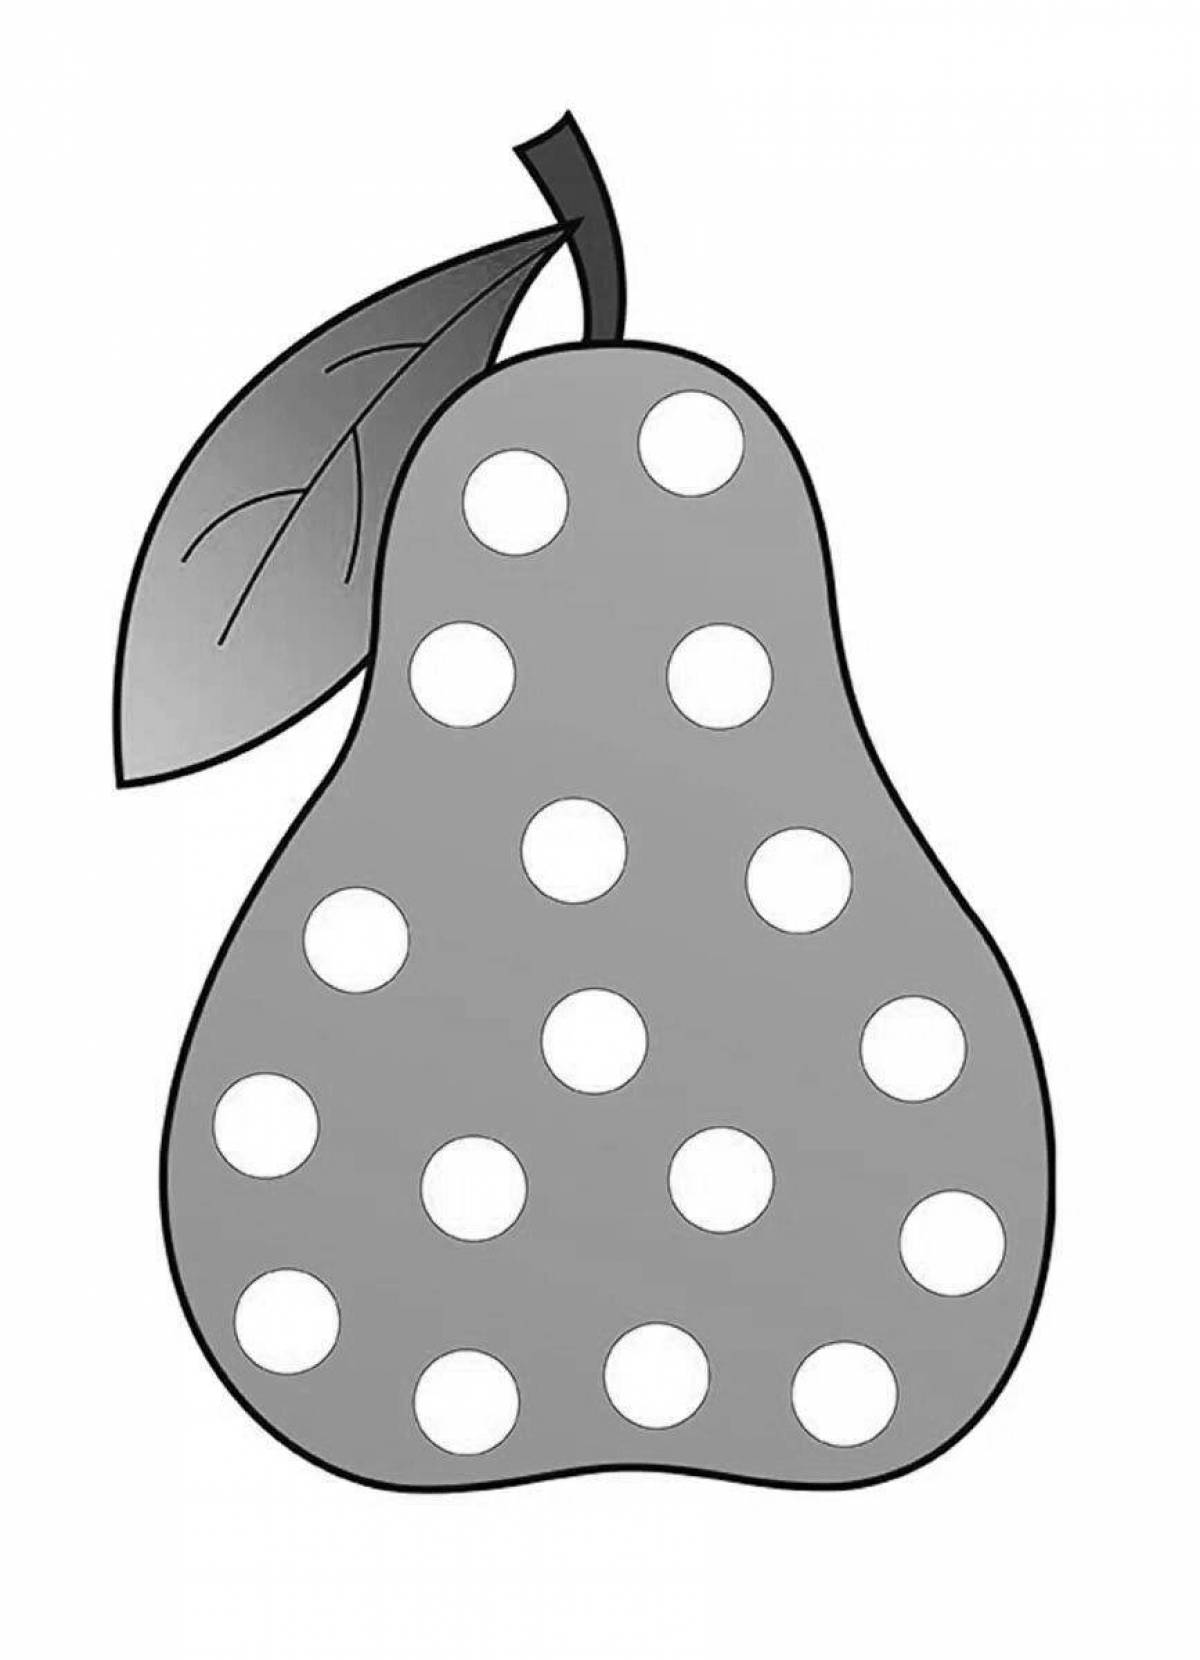 Coloring book magic pear for children 2-3 years old